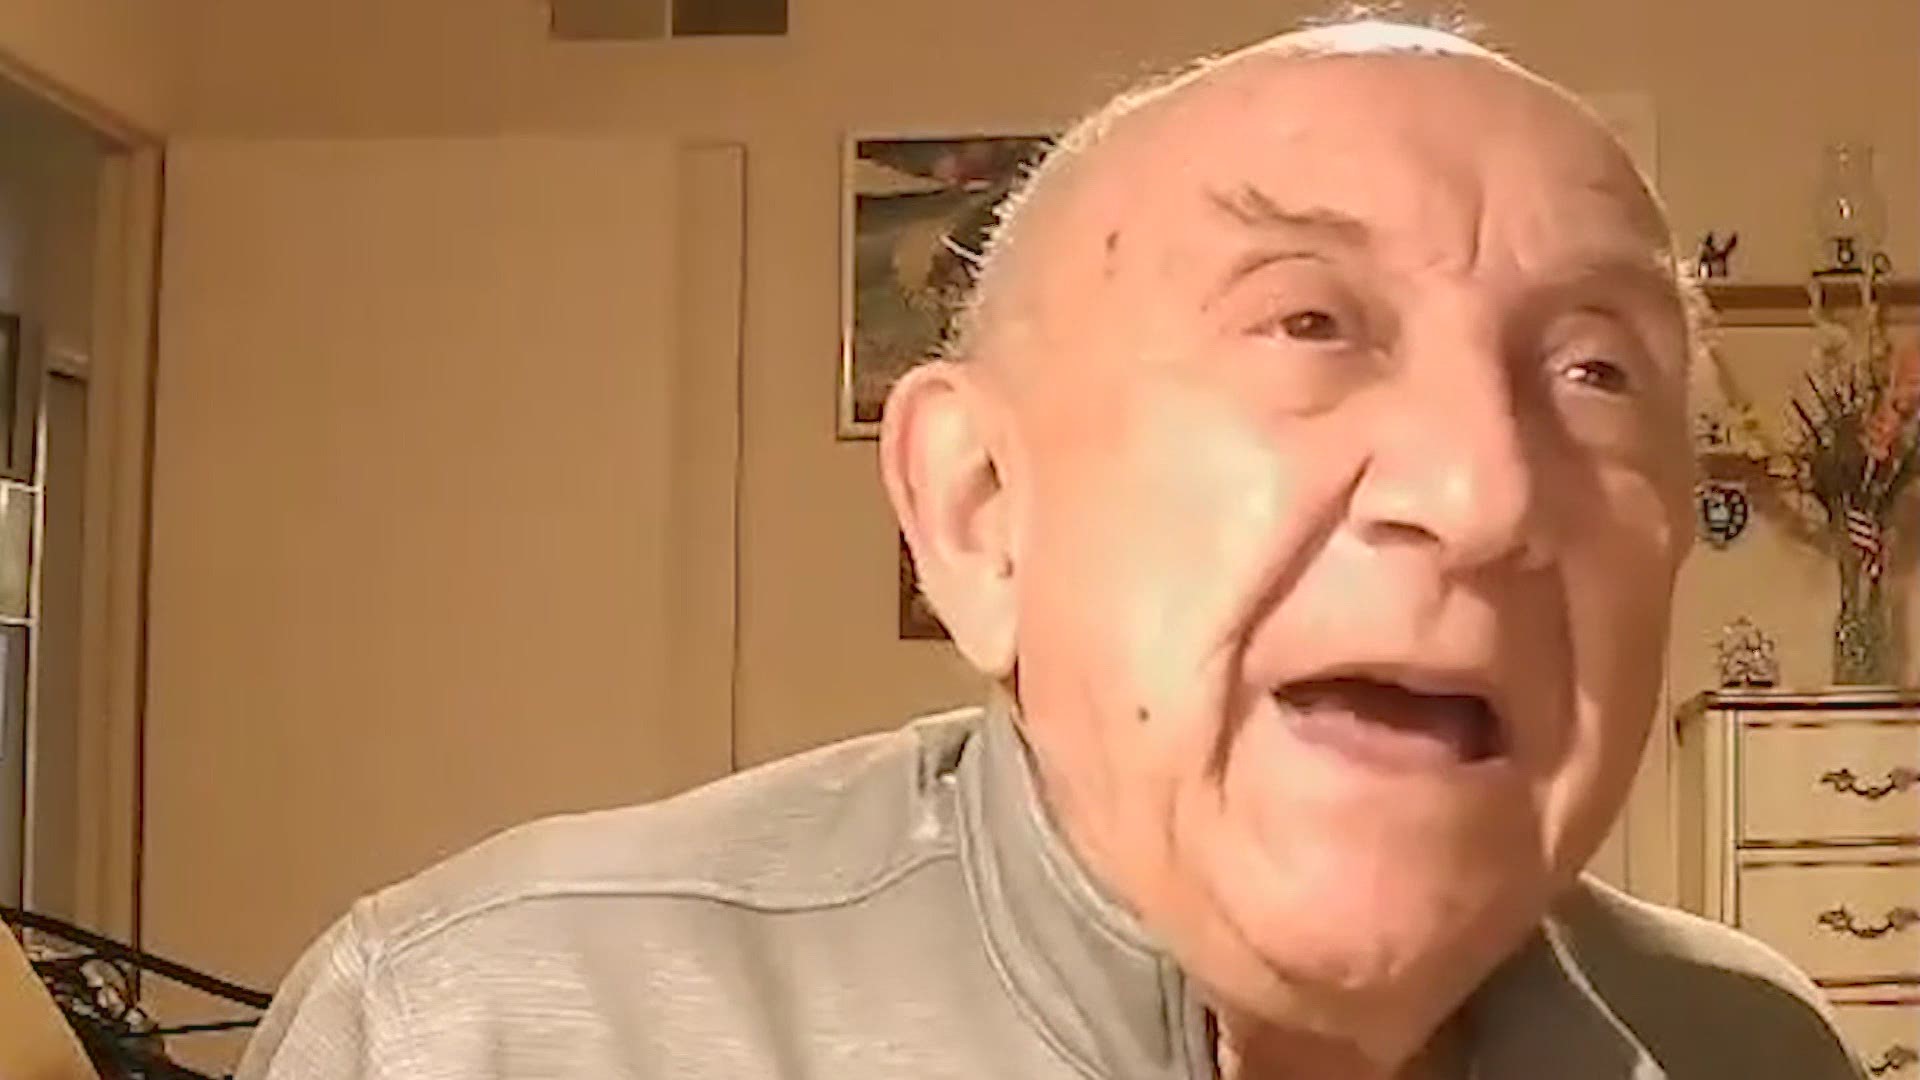 Dallas resident Max Glauben just celebrated his 93rd birthday. He’s Holocaust survivor who’s spent his life trying to educate others about the tragedy.